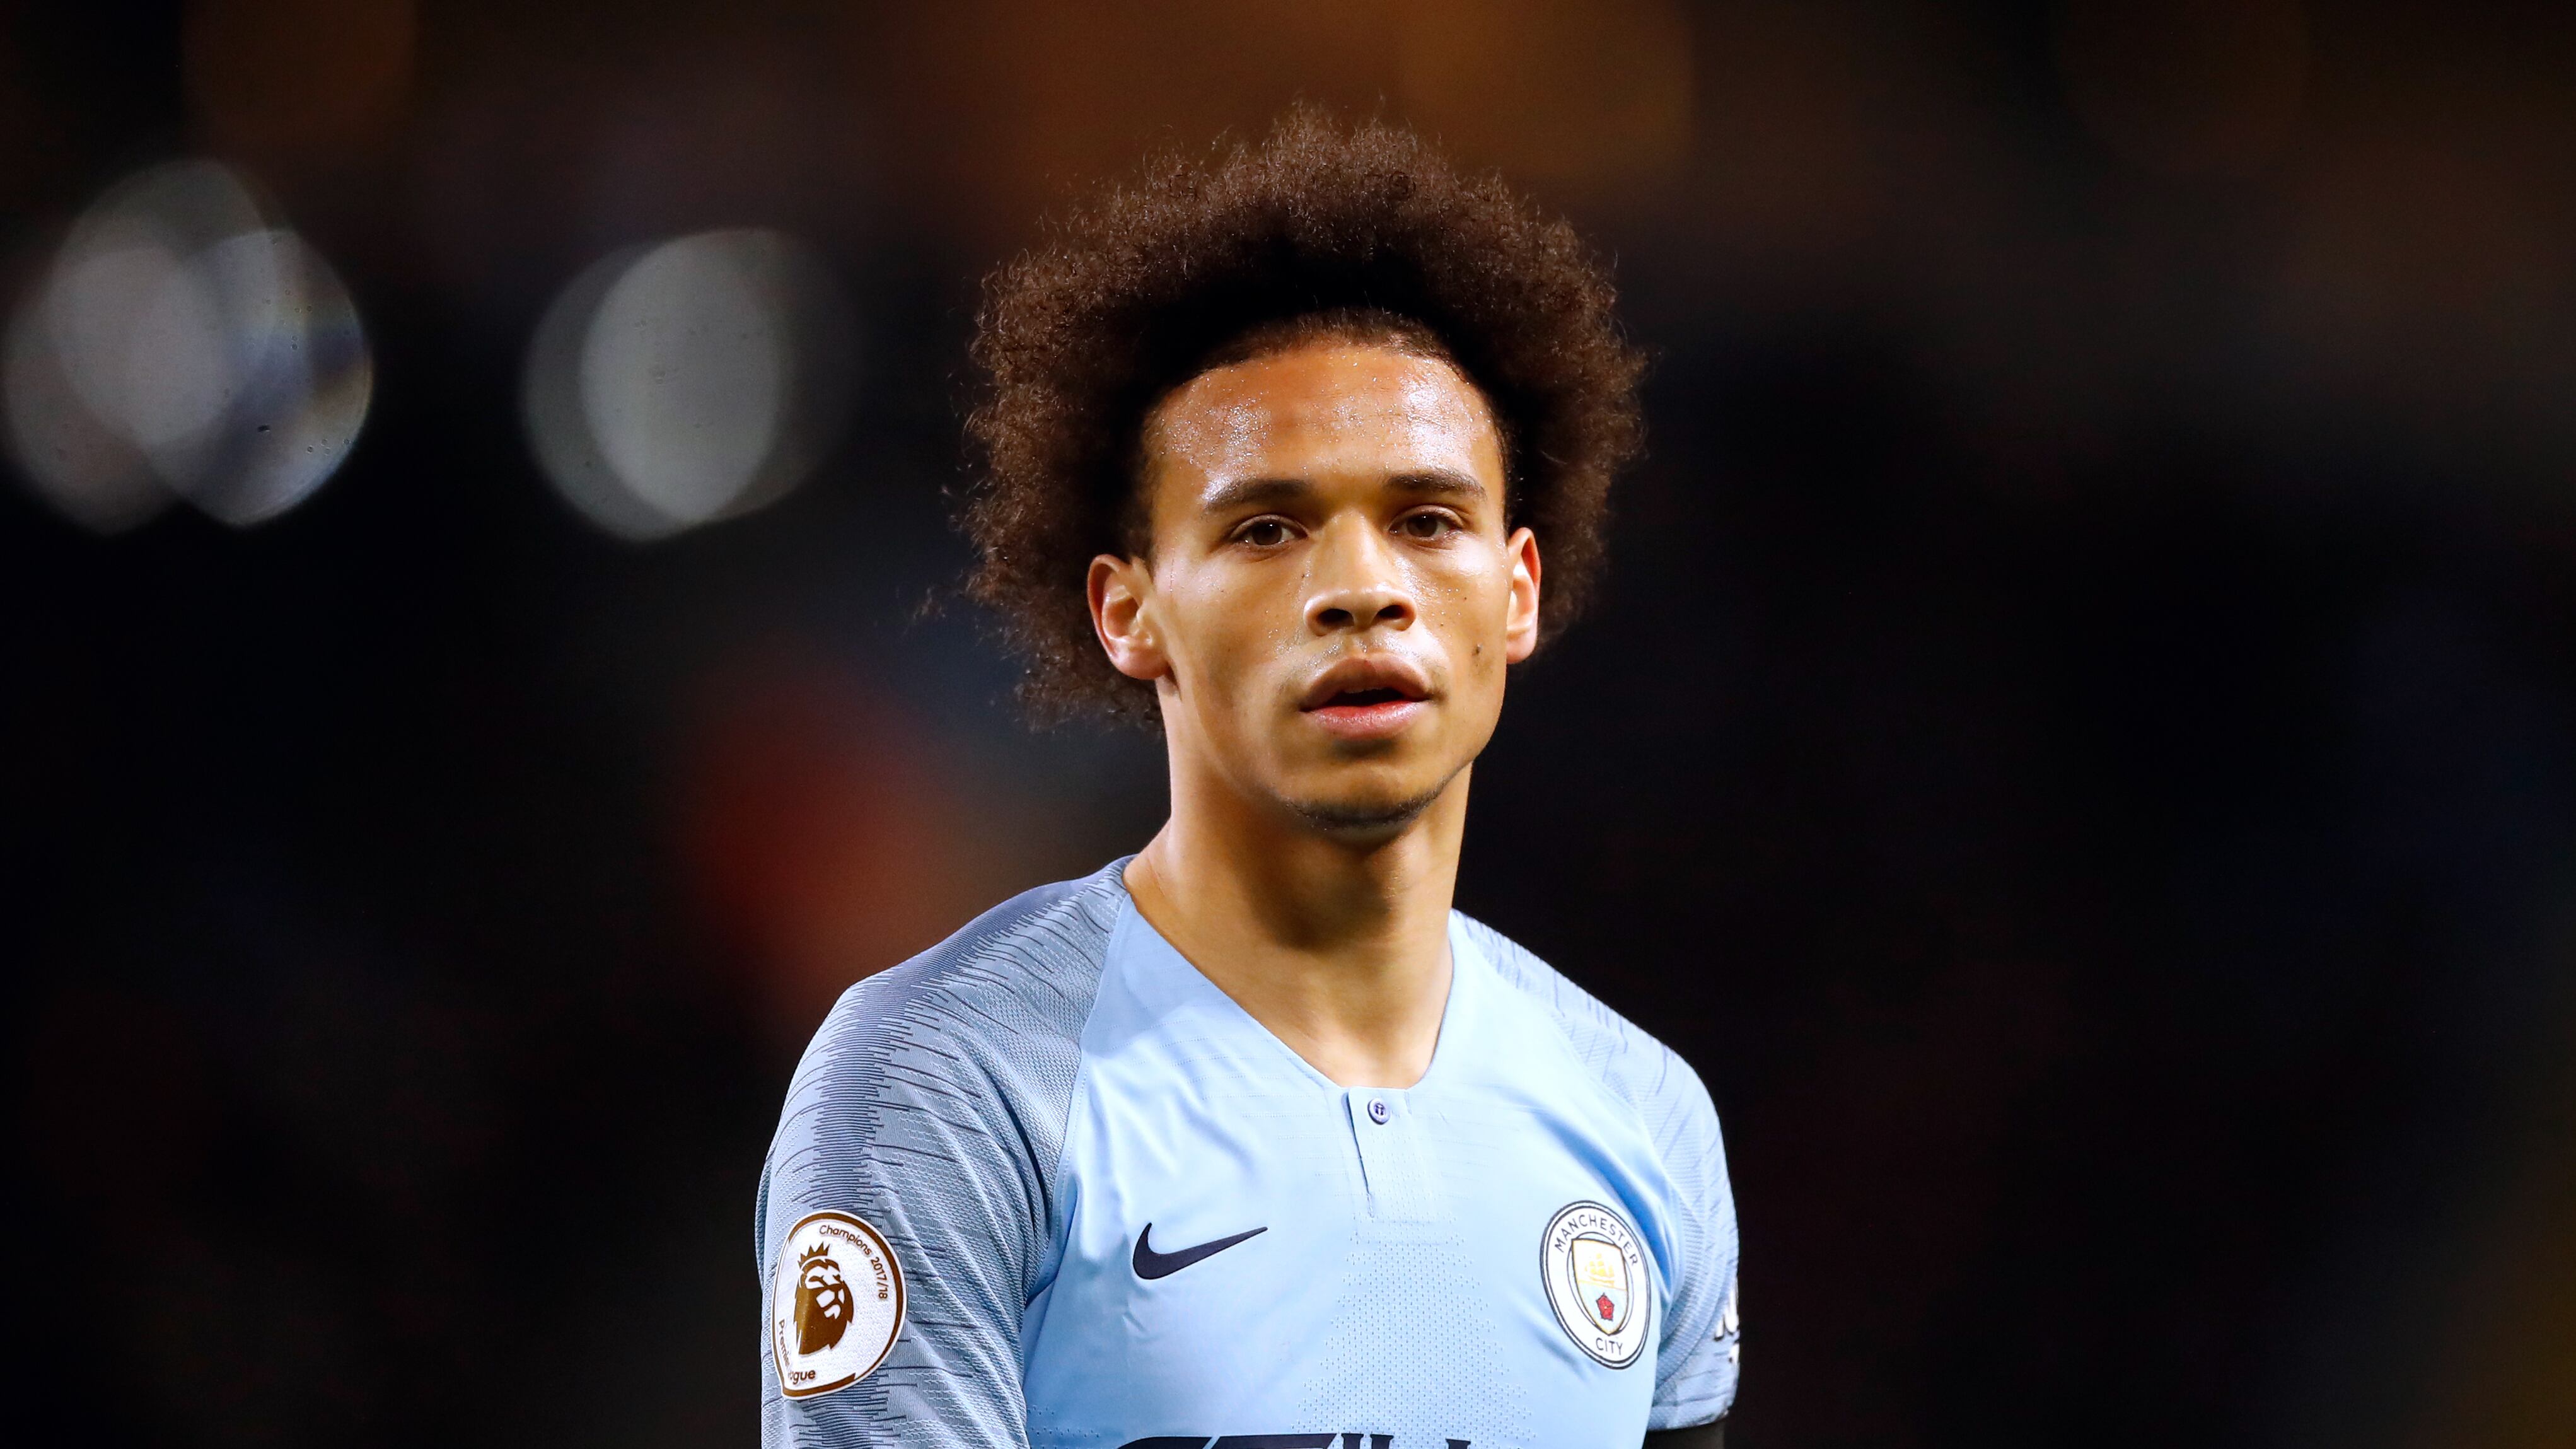 Leroy Sane’s move to Bayern Munich from Manchester City was agreed on this day in 2020